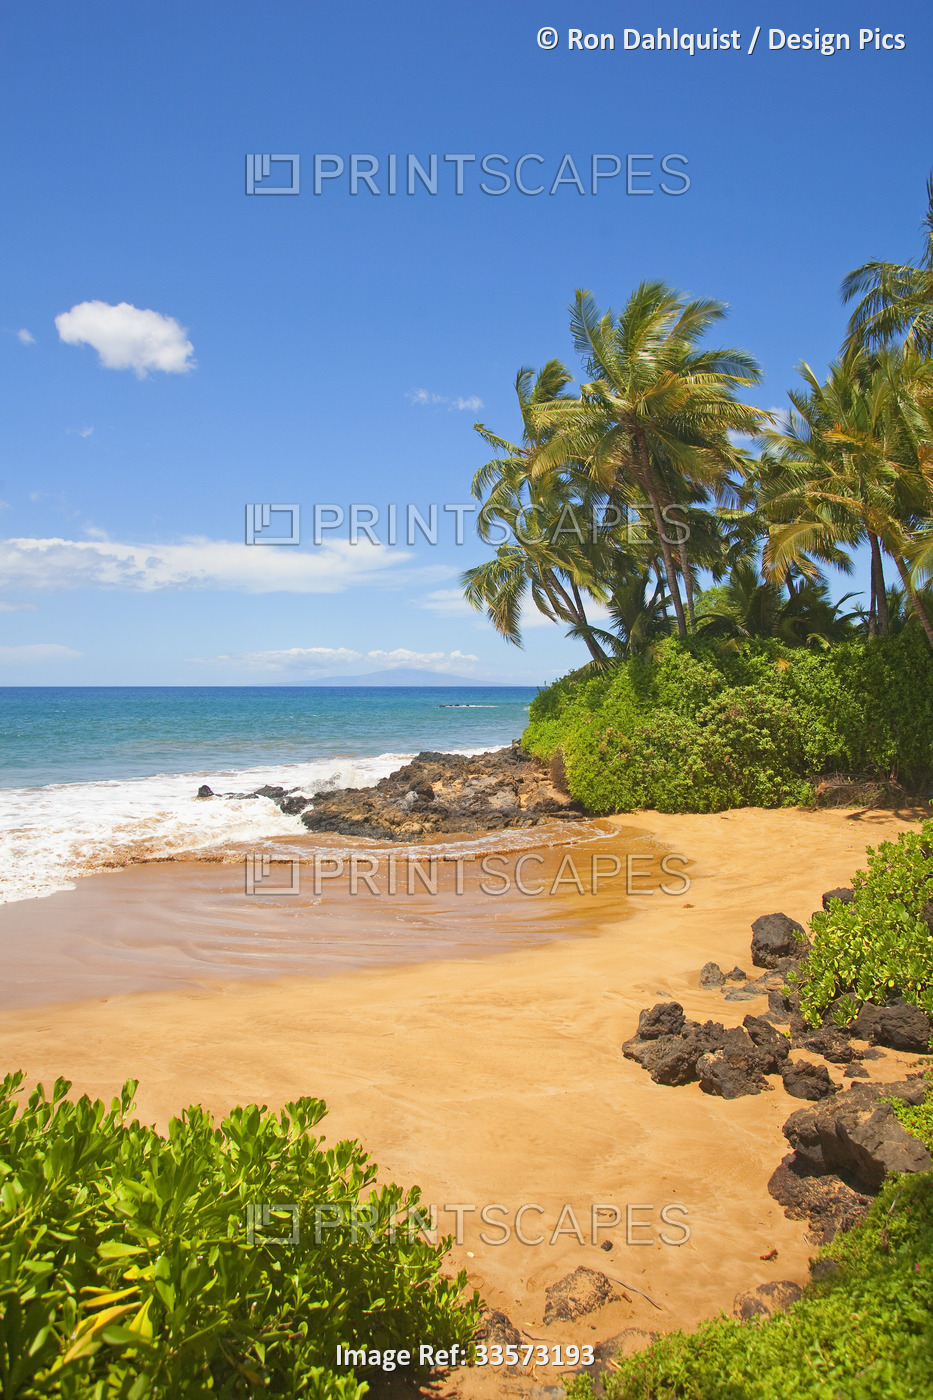 Small, sandy Chang's Beach near Po'olenalena Beach with oceanfront views; ...